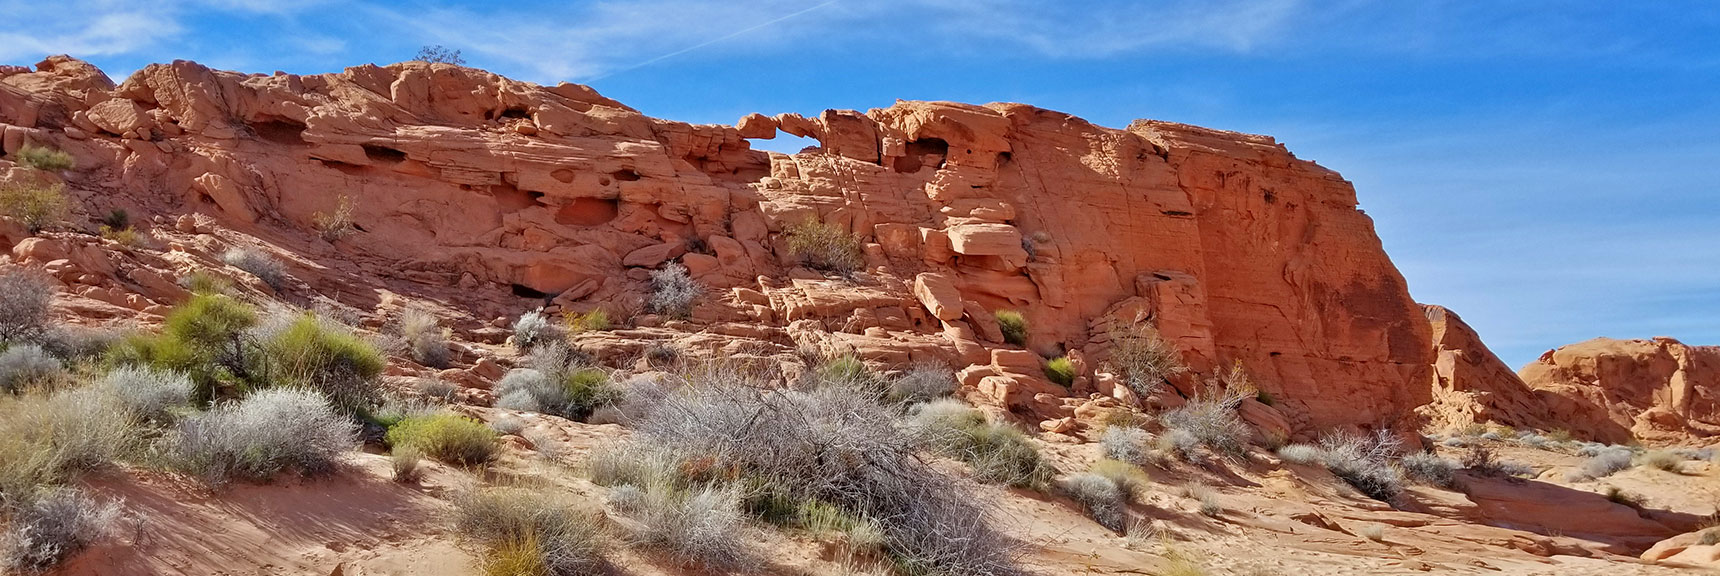 Lone Arch on Natural Arches Trail, Valley of Fire State Park, Nevada